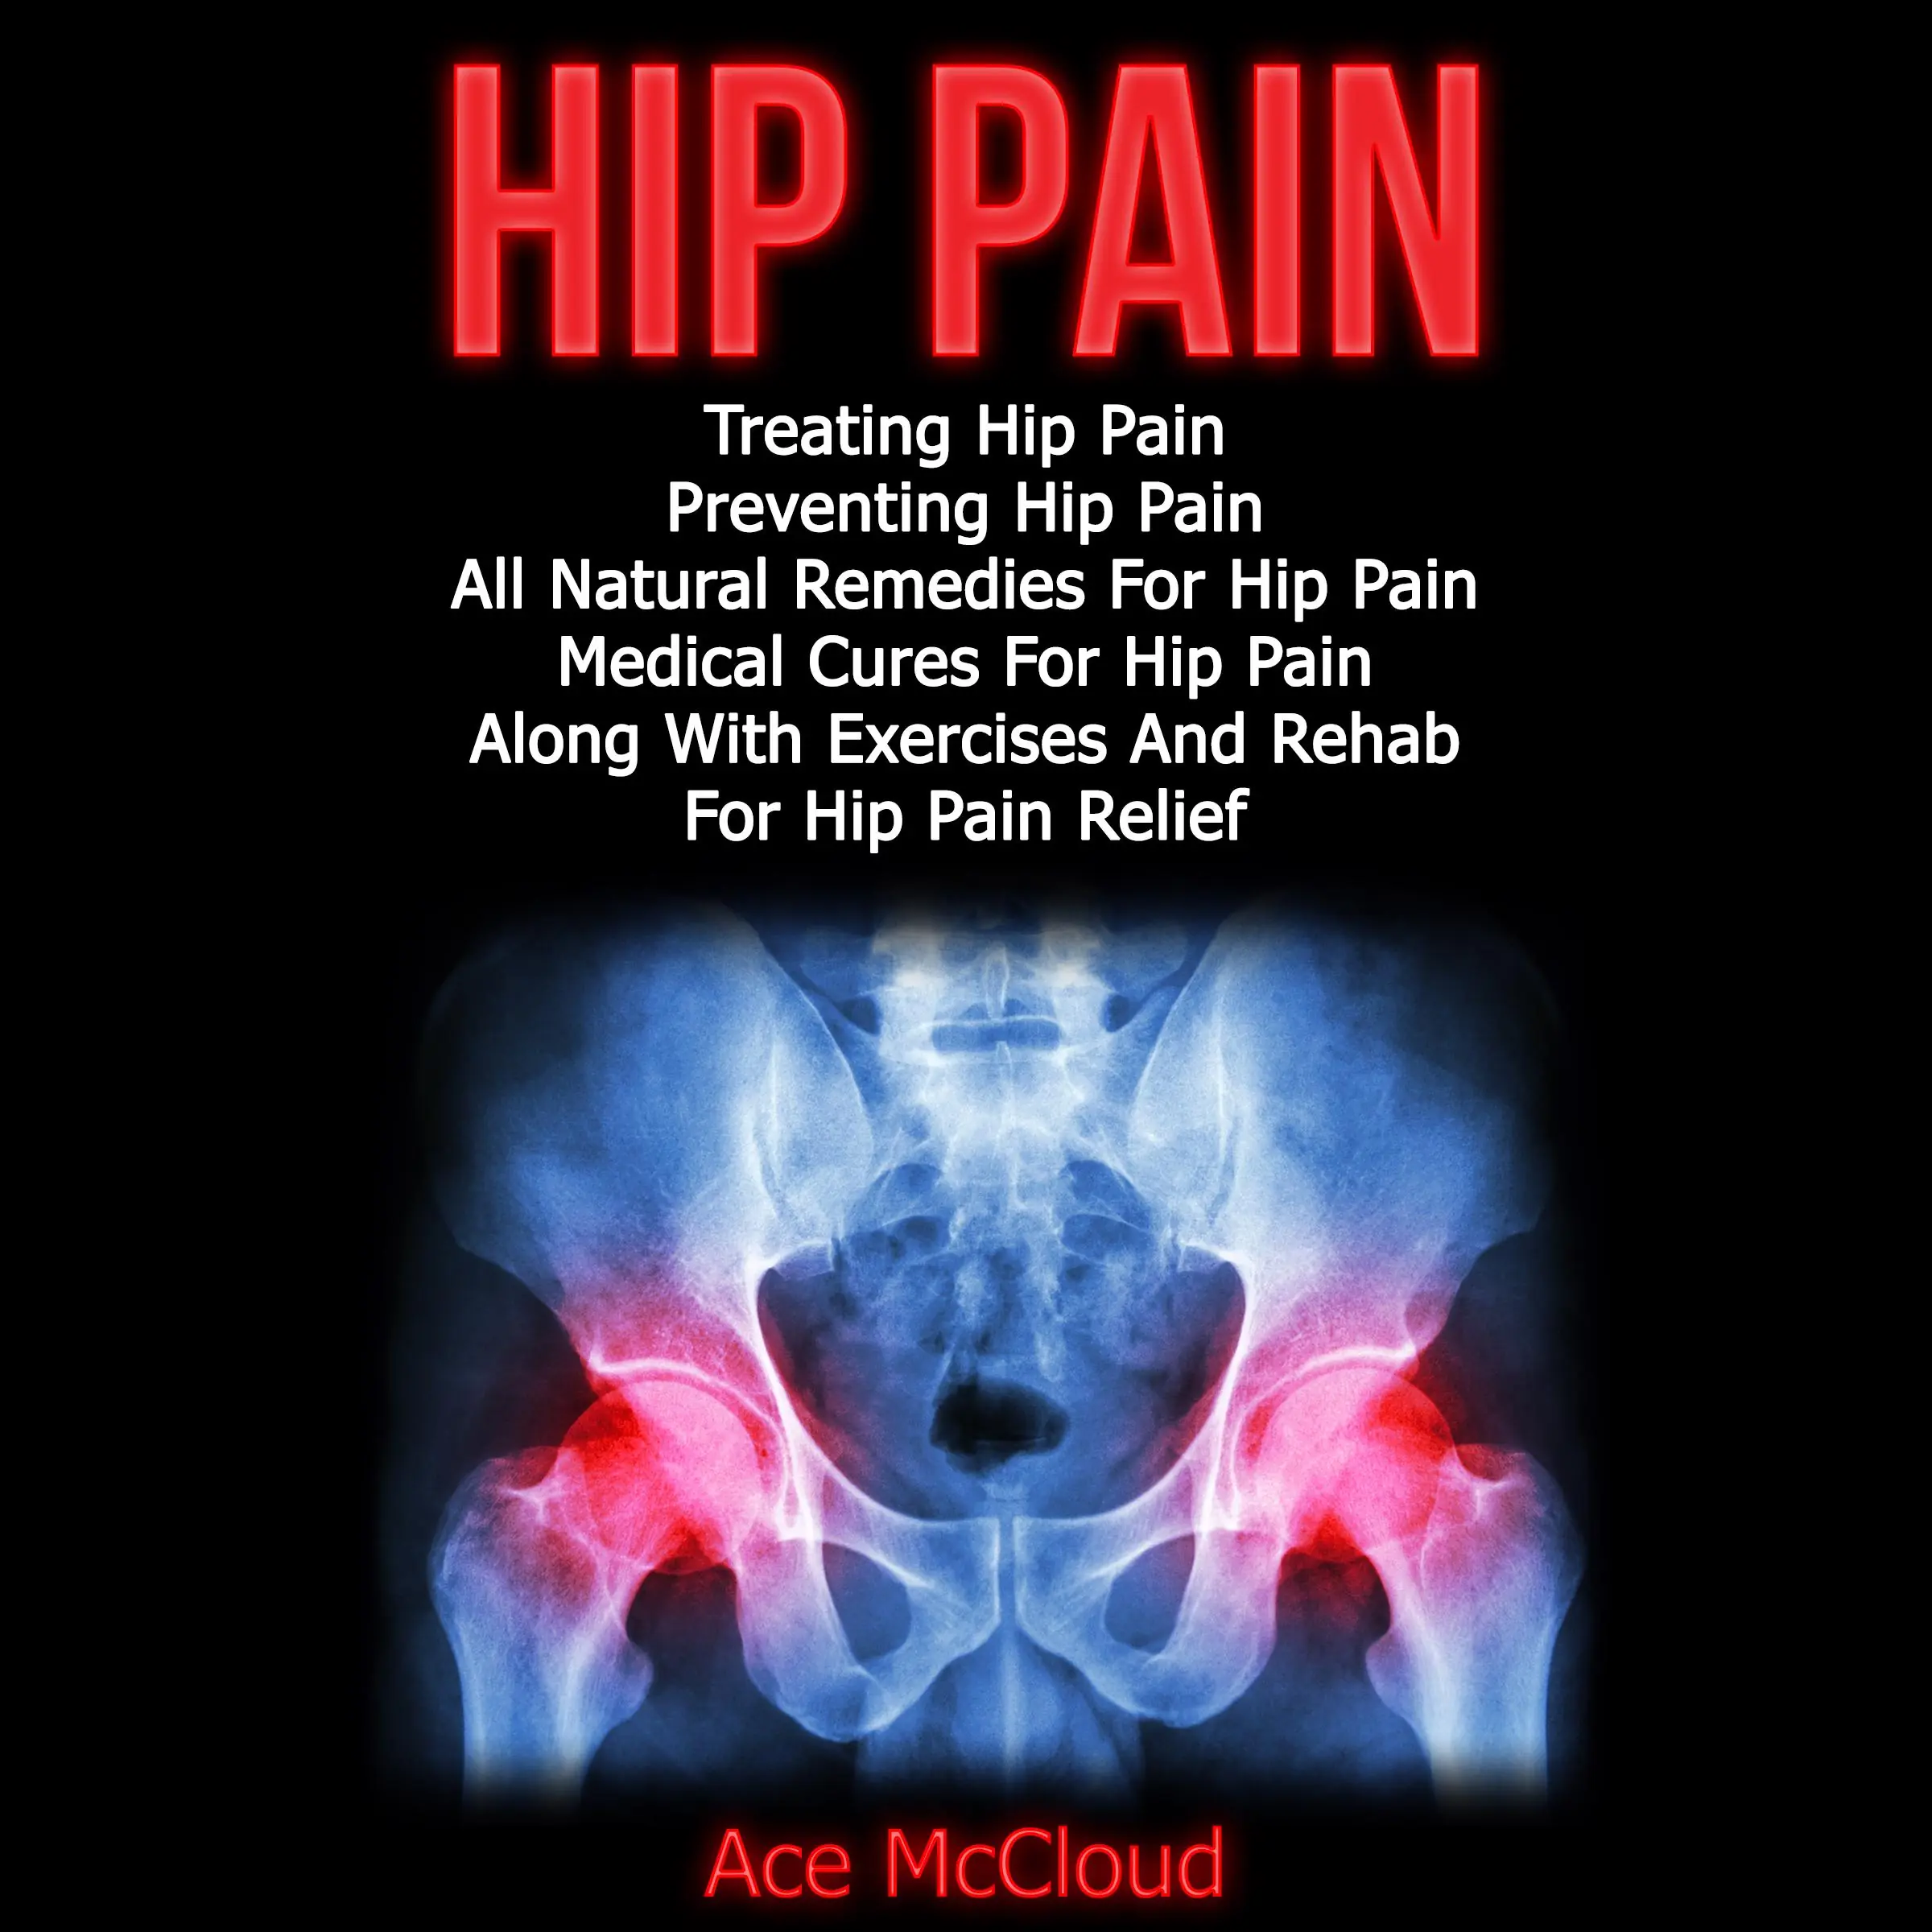 Hip Pain: Treating Hip Pain: Preventing Hip Pain, All Natural Remedies For Hip Pain, Medical Cures For Hip Pain, Along With Exercises And Rehab For Hip Pain Relief Audiobook by Ace McCloud